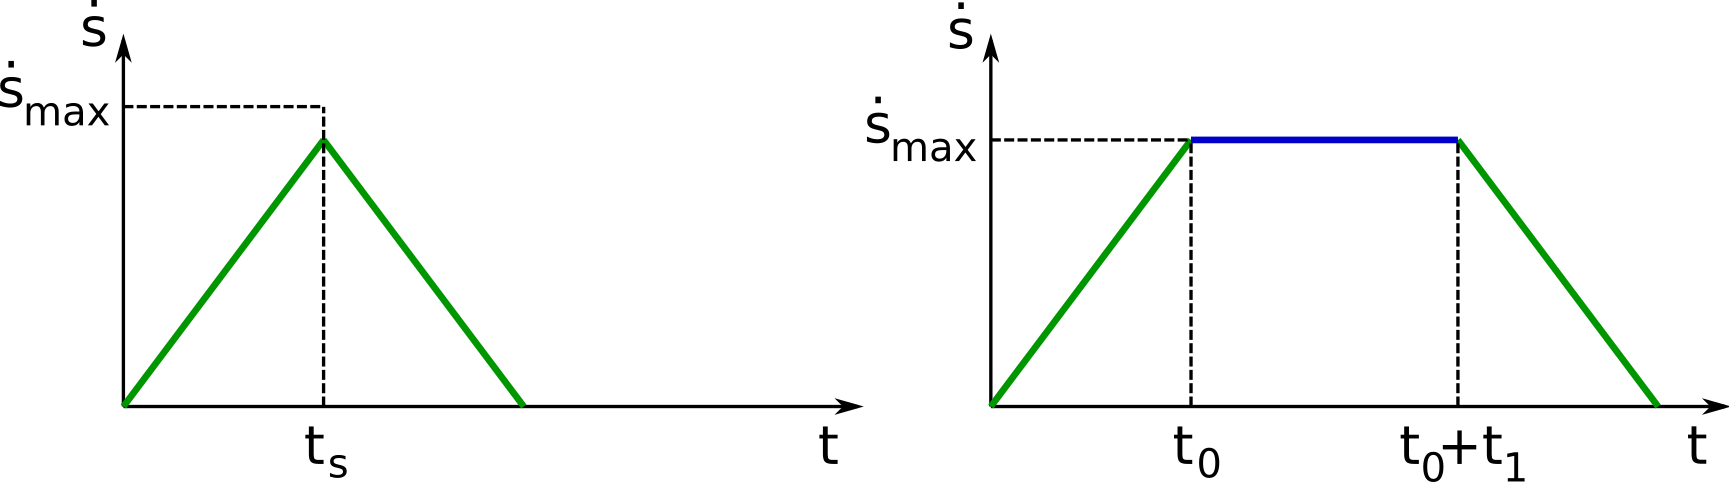 Velocity profile for the time-parameterization of a straight
path under velocity and acceleration bounds. Left: case 1 (max
acceleration – max deceleration). Right: case 2 (max acceleration –
constant velocity – max deceleration).